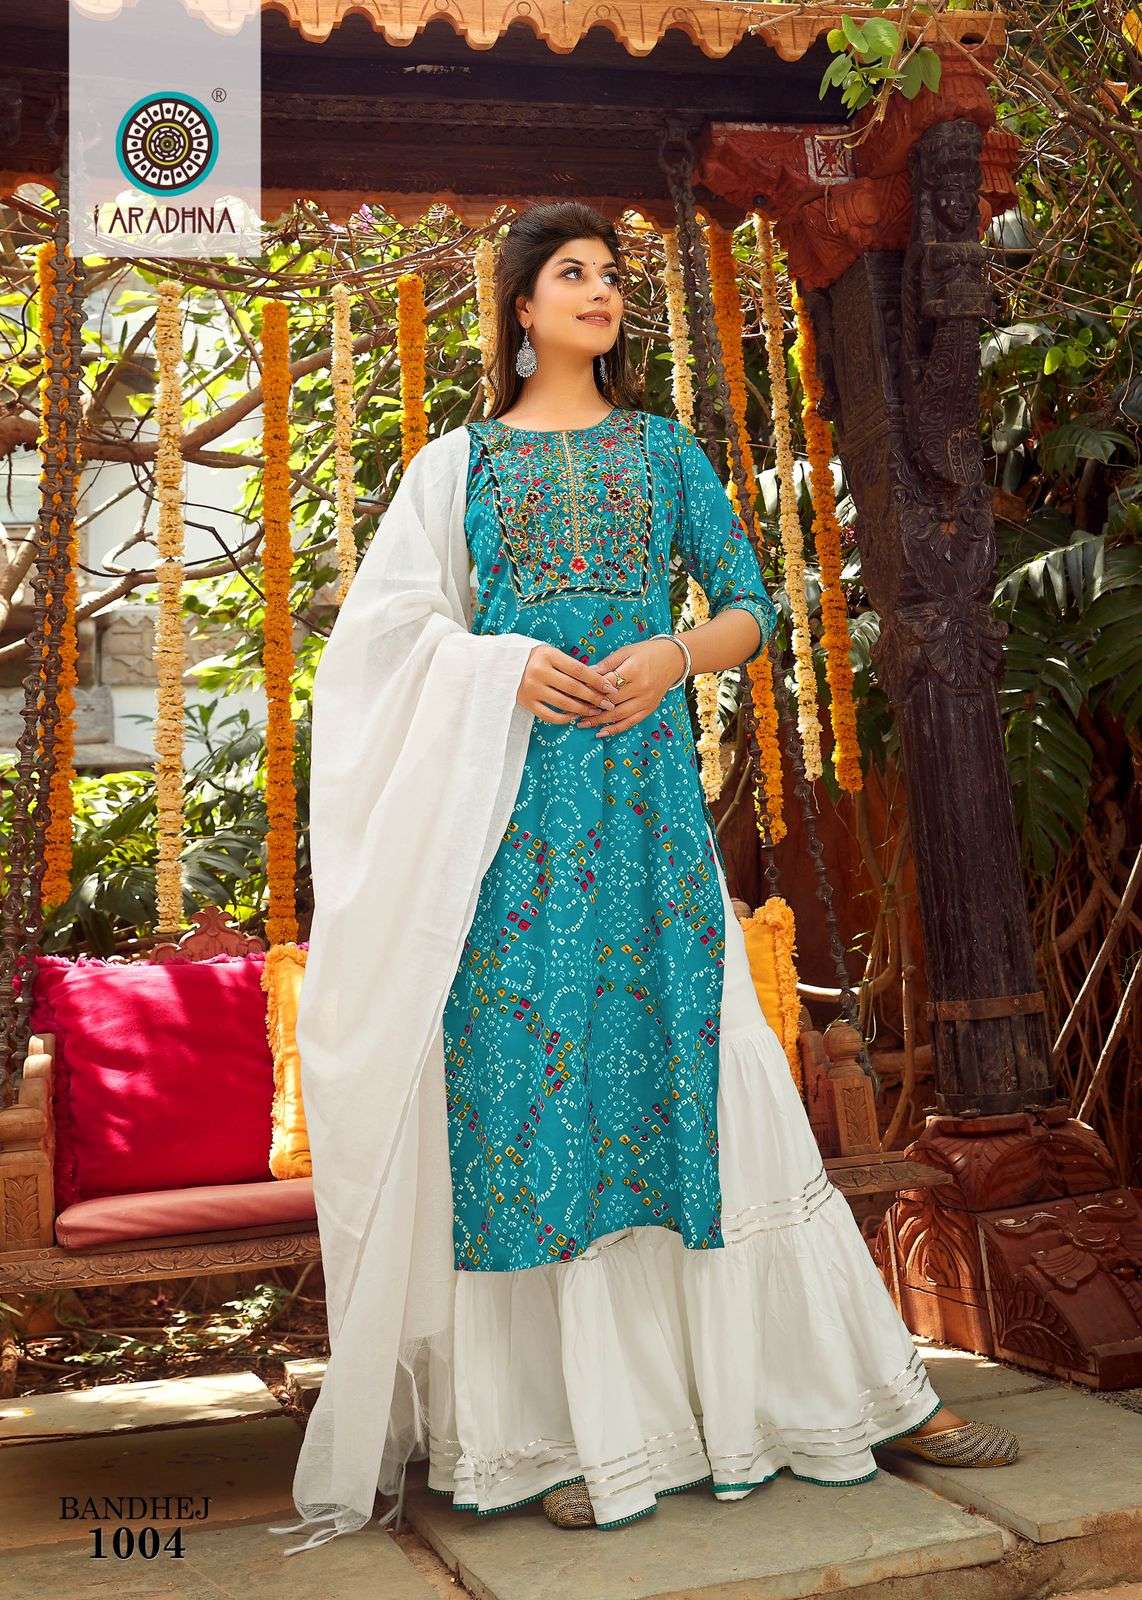 ARADHNA PRESENTS BANDHEJ 1 FESTIVE HEAVY RAYON EMBROIDERY WHOLESALE READYMADE COLLECTION